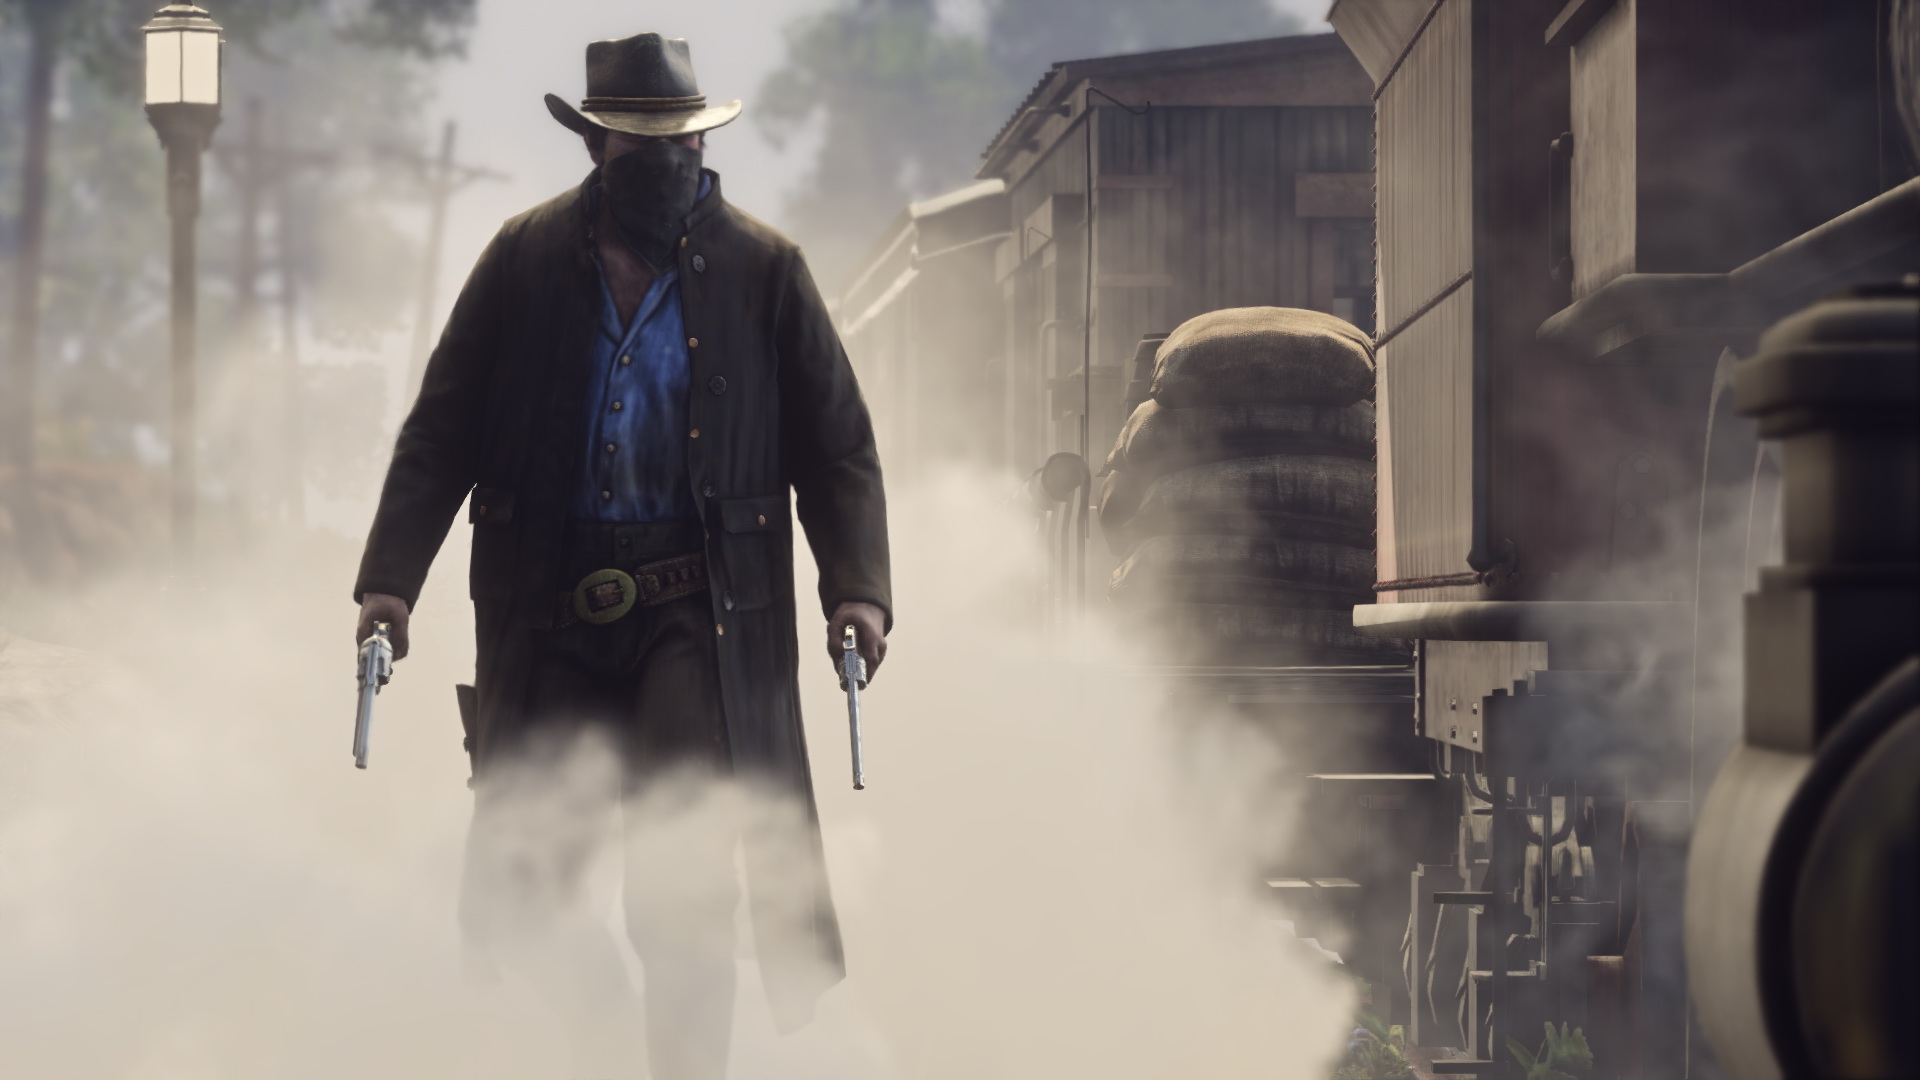 Media asset in full size related to 3dfxzone.it news item entitled as follows: Rockstar Games rinvia il lancio del game Red Dead Redemption 2 | Image Name: news26396_Red-Dead-Redemption-2-Screenshot_4.jpg